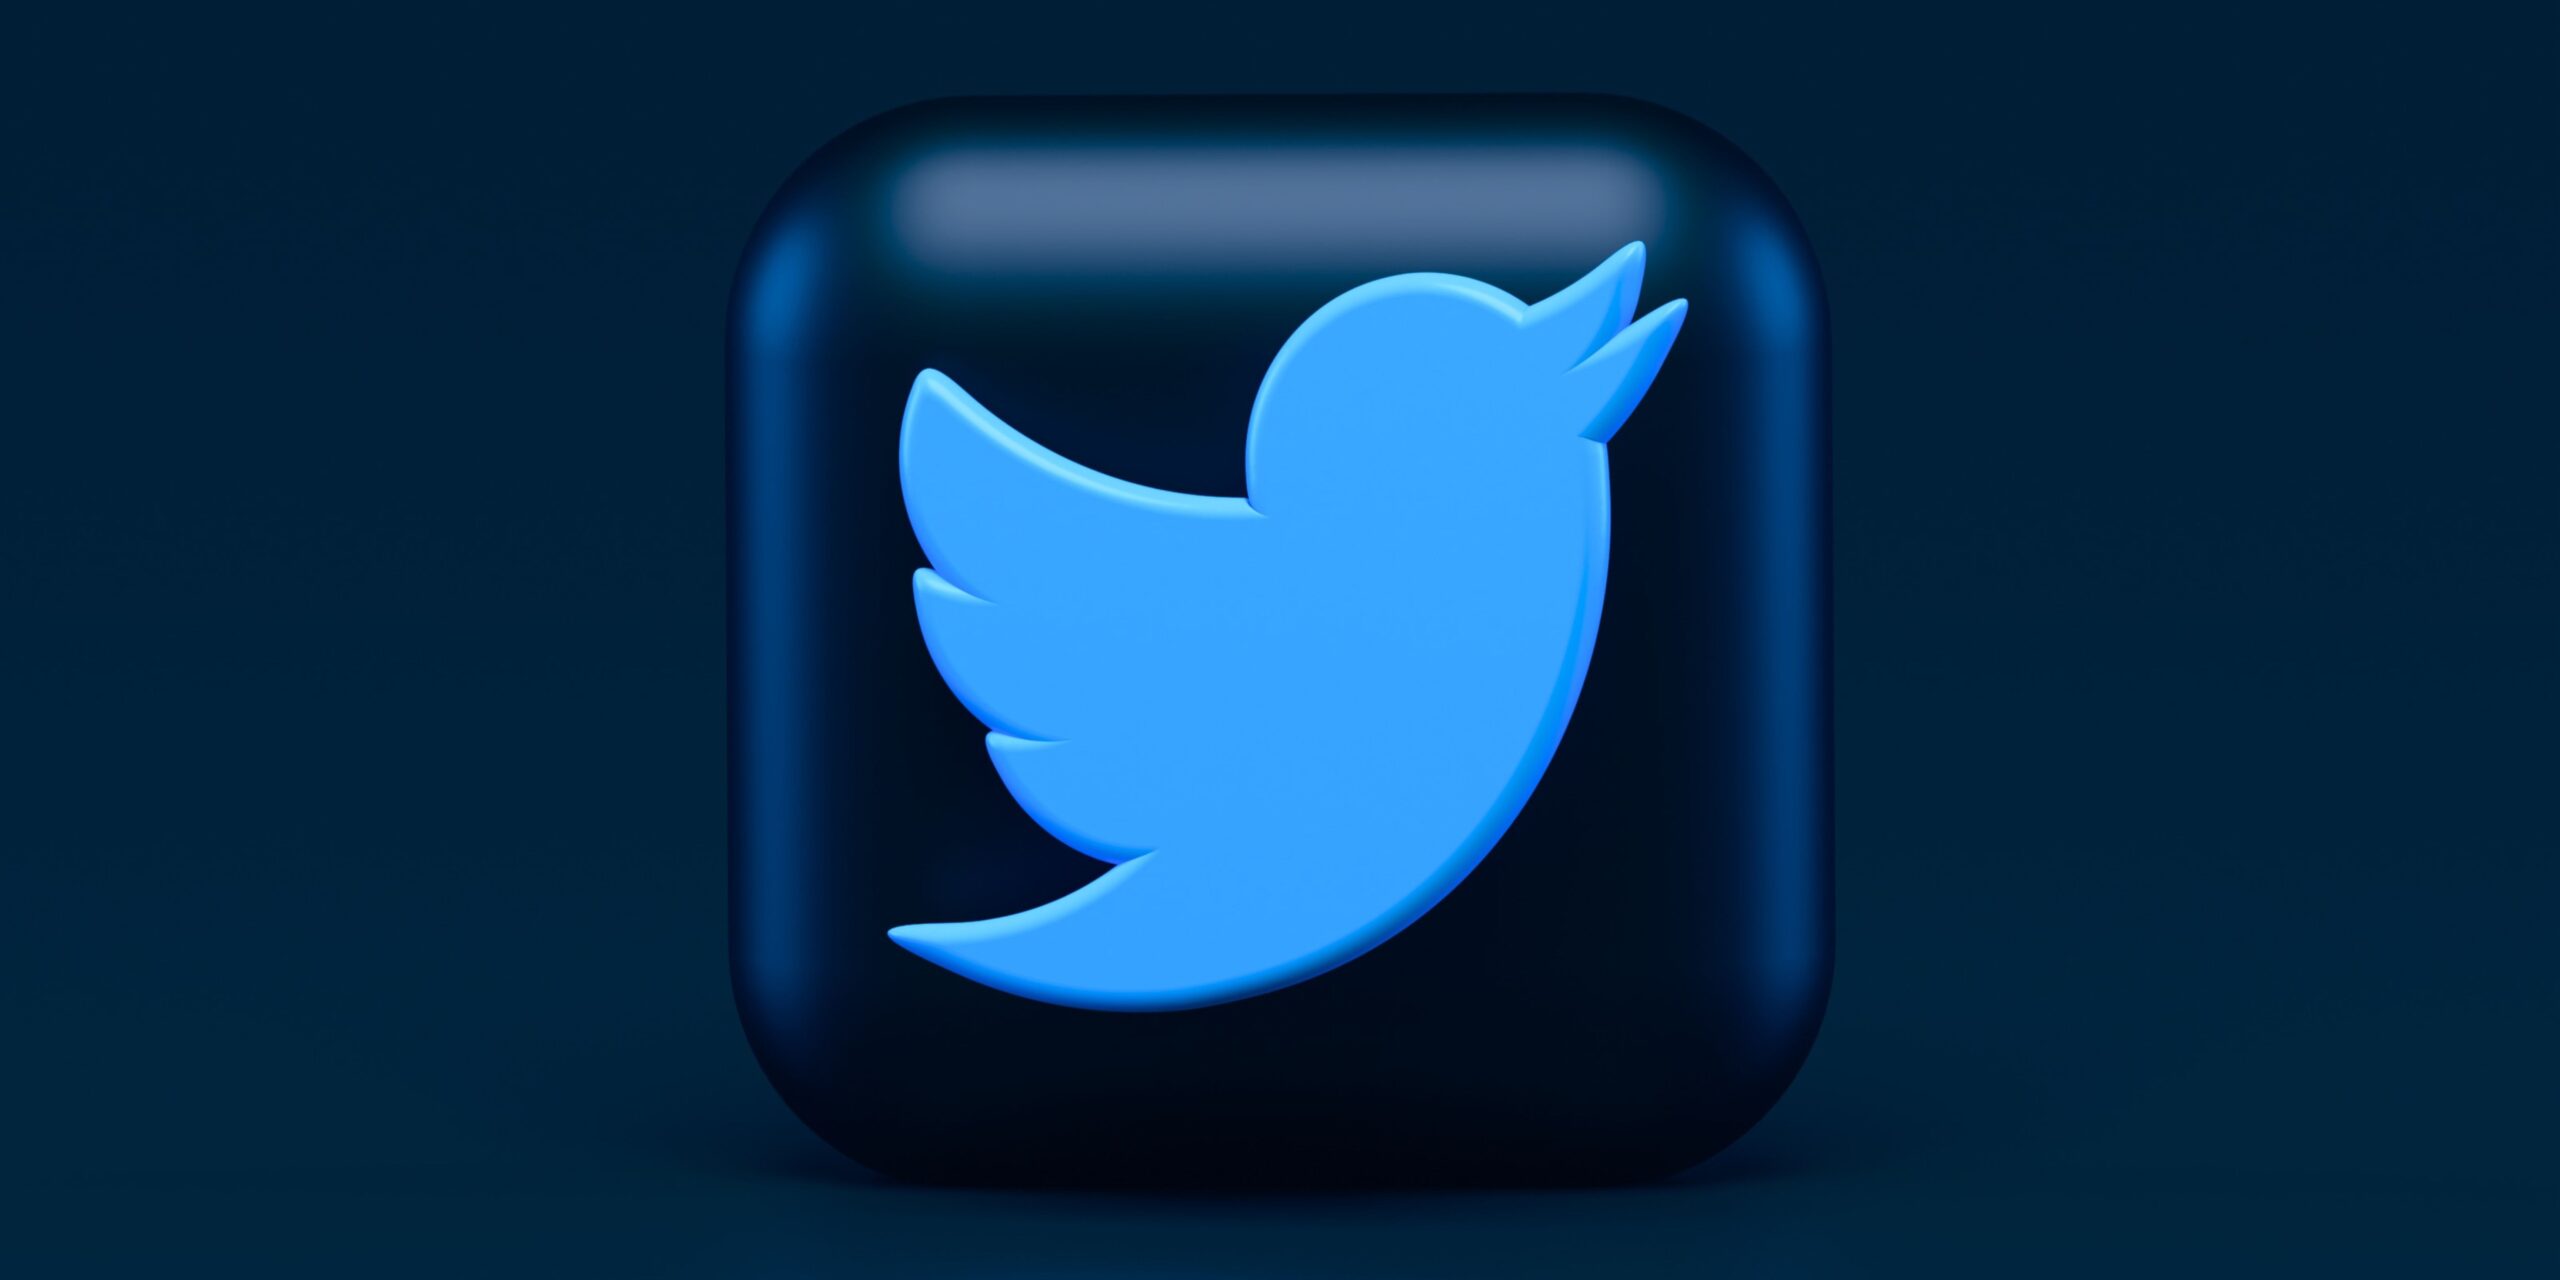 How to log out of Twitter on iPhone and Mac